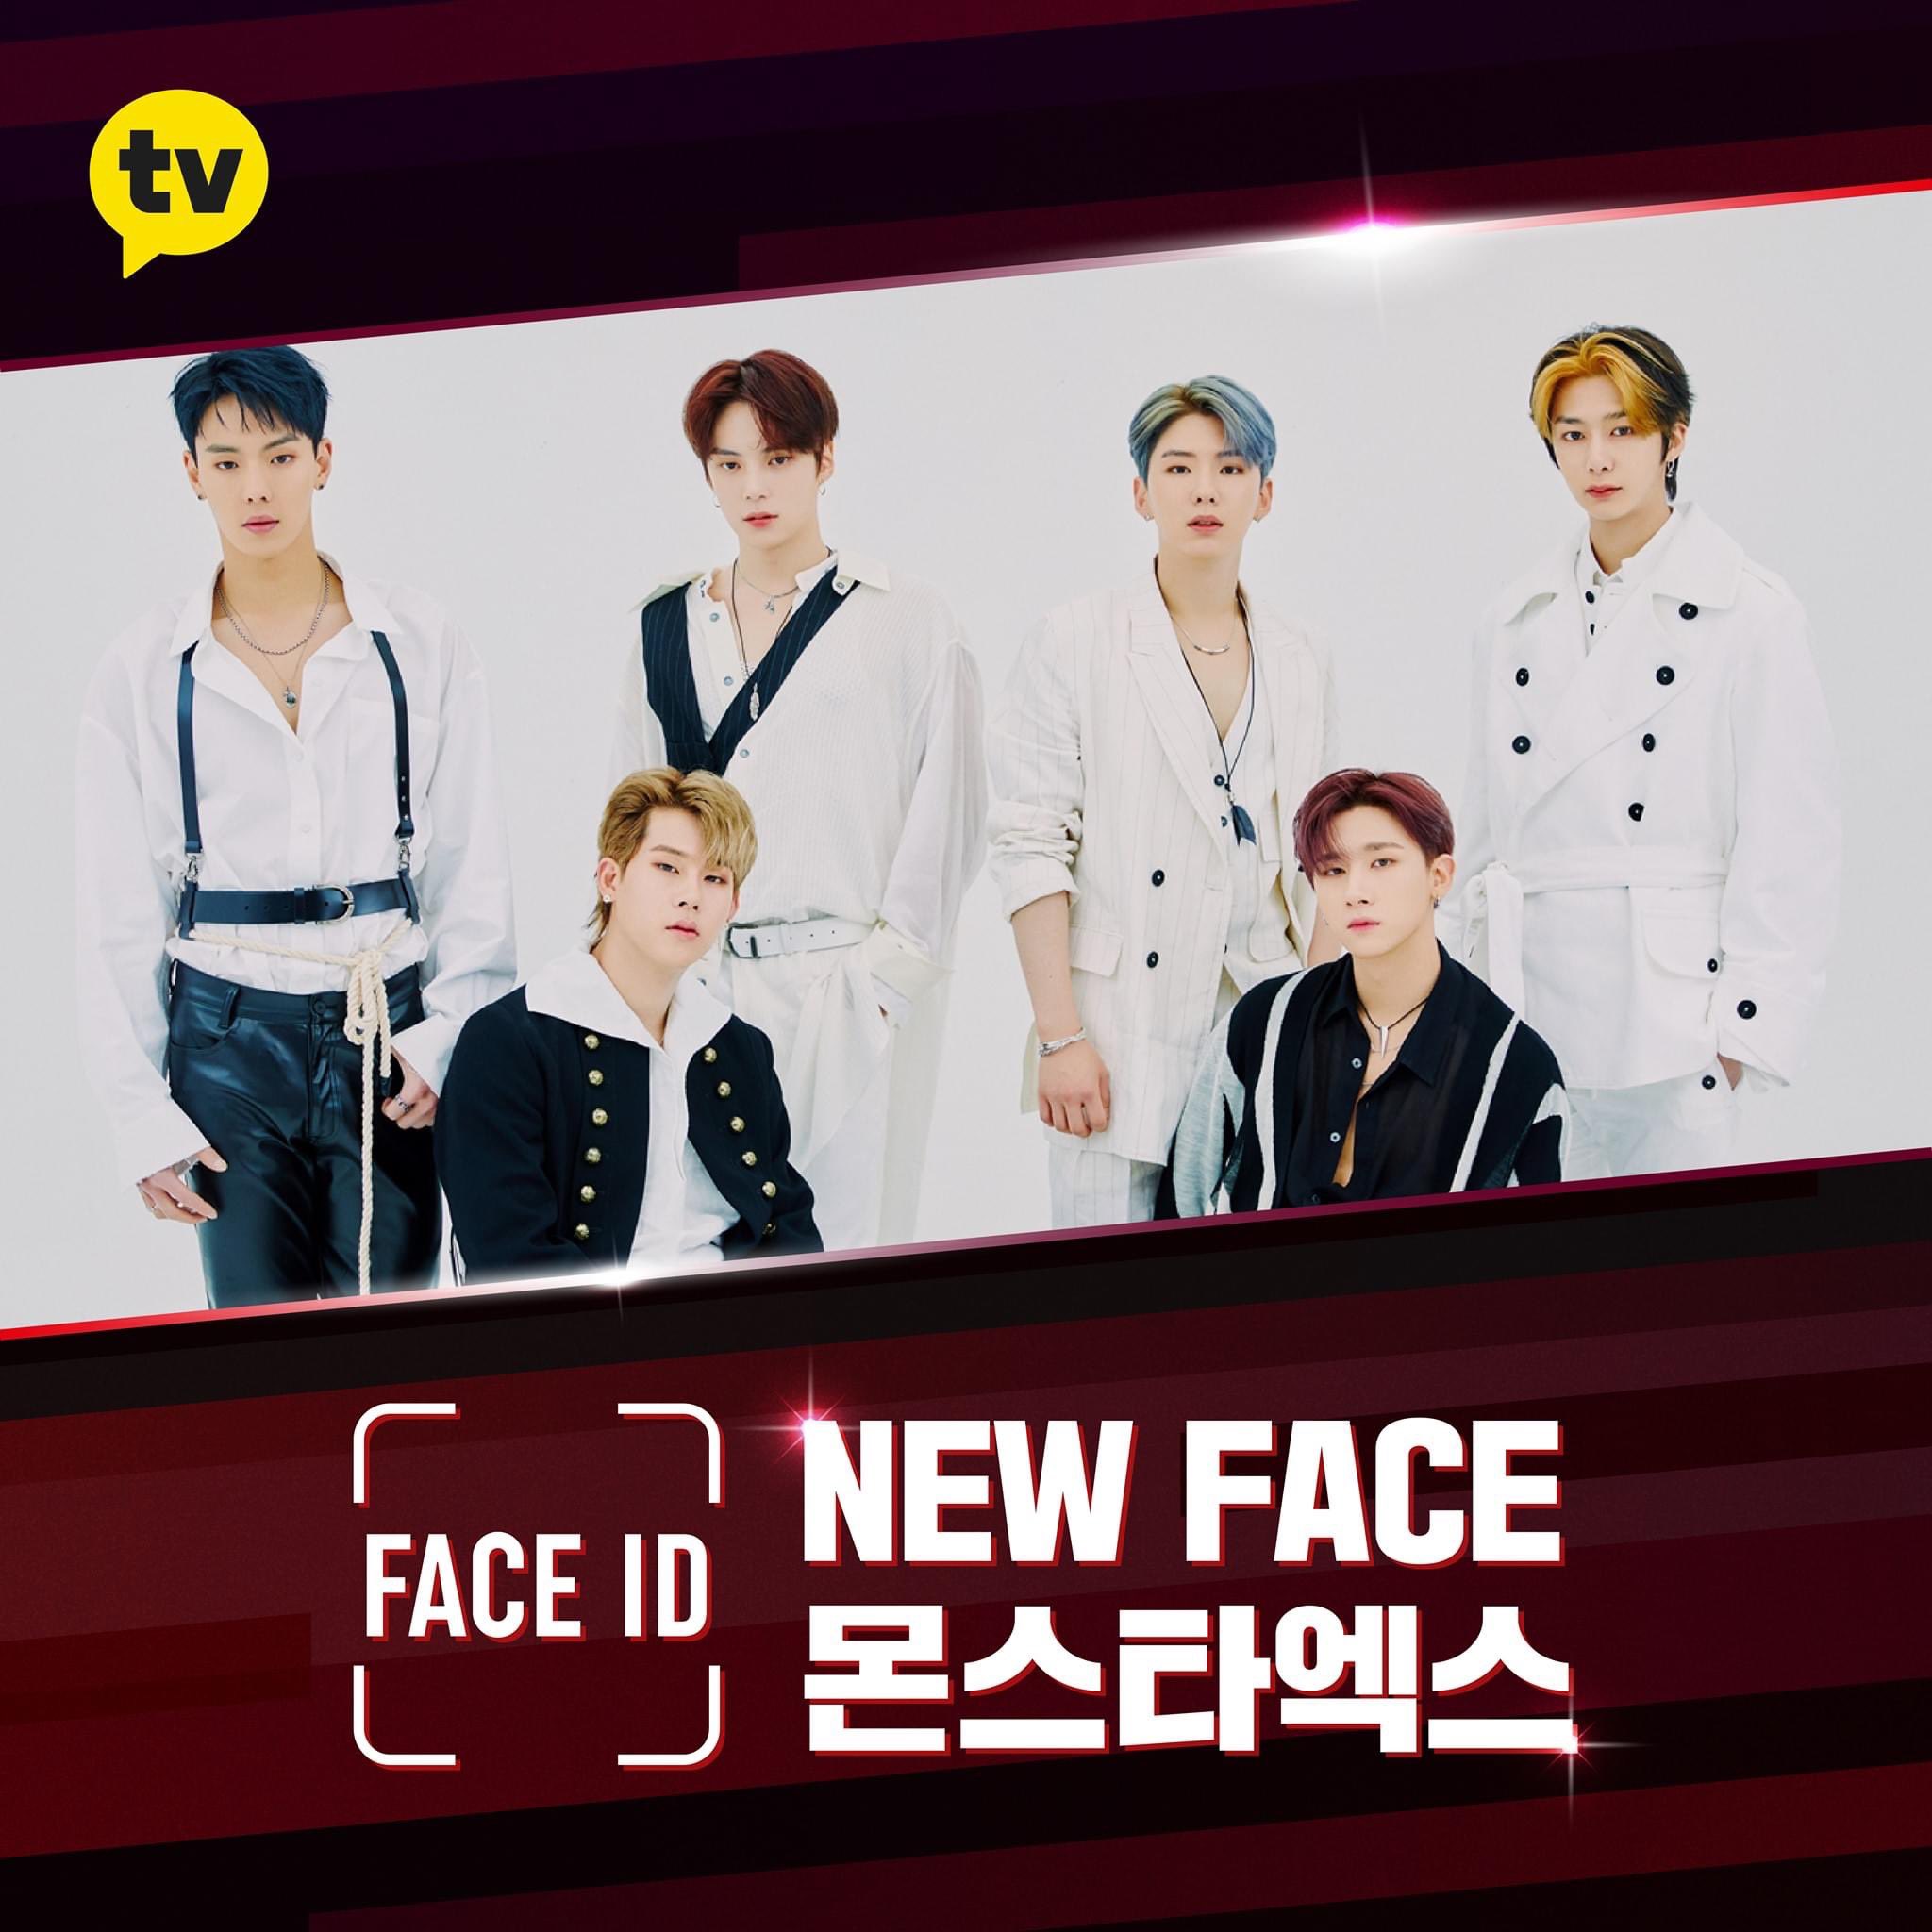 monsta-x-to-appear-on-4-episodes-of-kakaotv-face-id-starting-october-26-2